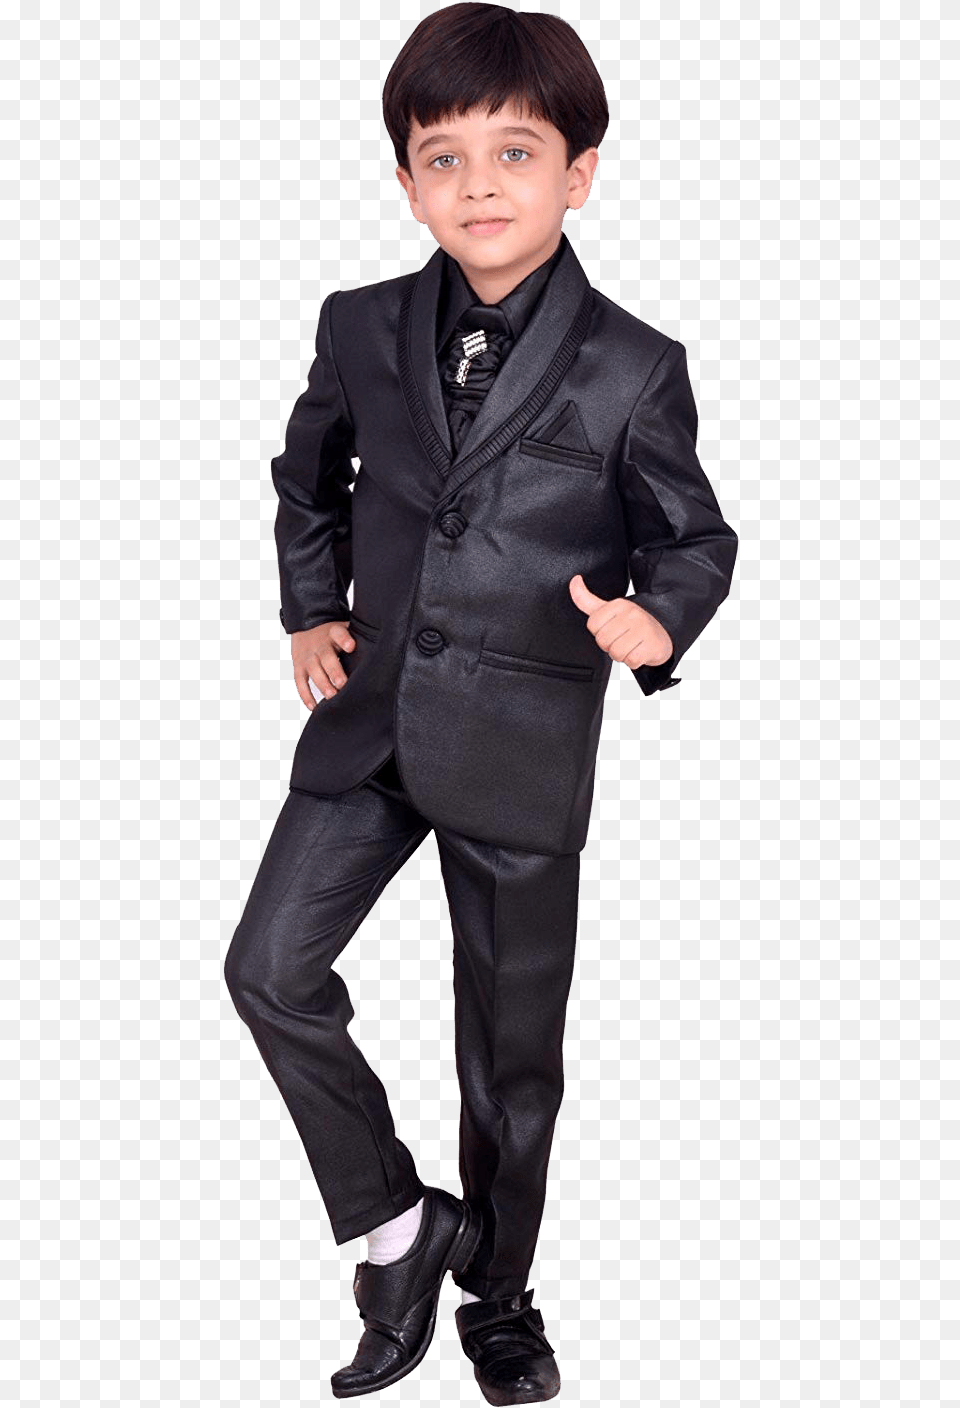 Kids Coat Pant File 8 Years Old Boy Coat, Tuxedo, Suit, Formal Wear, Clothing Png